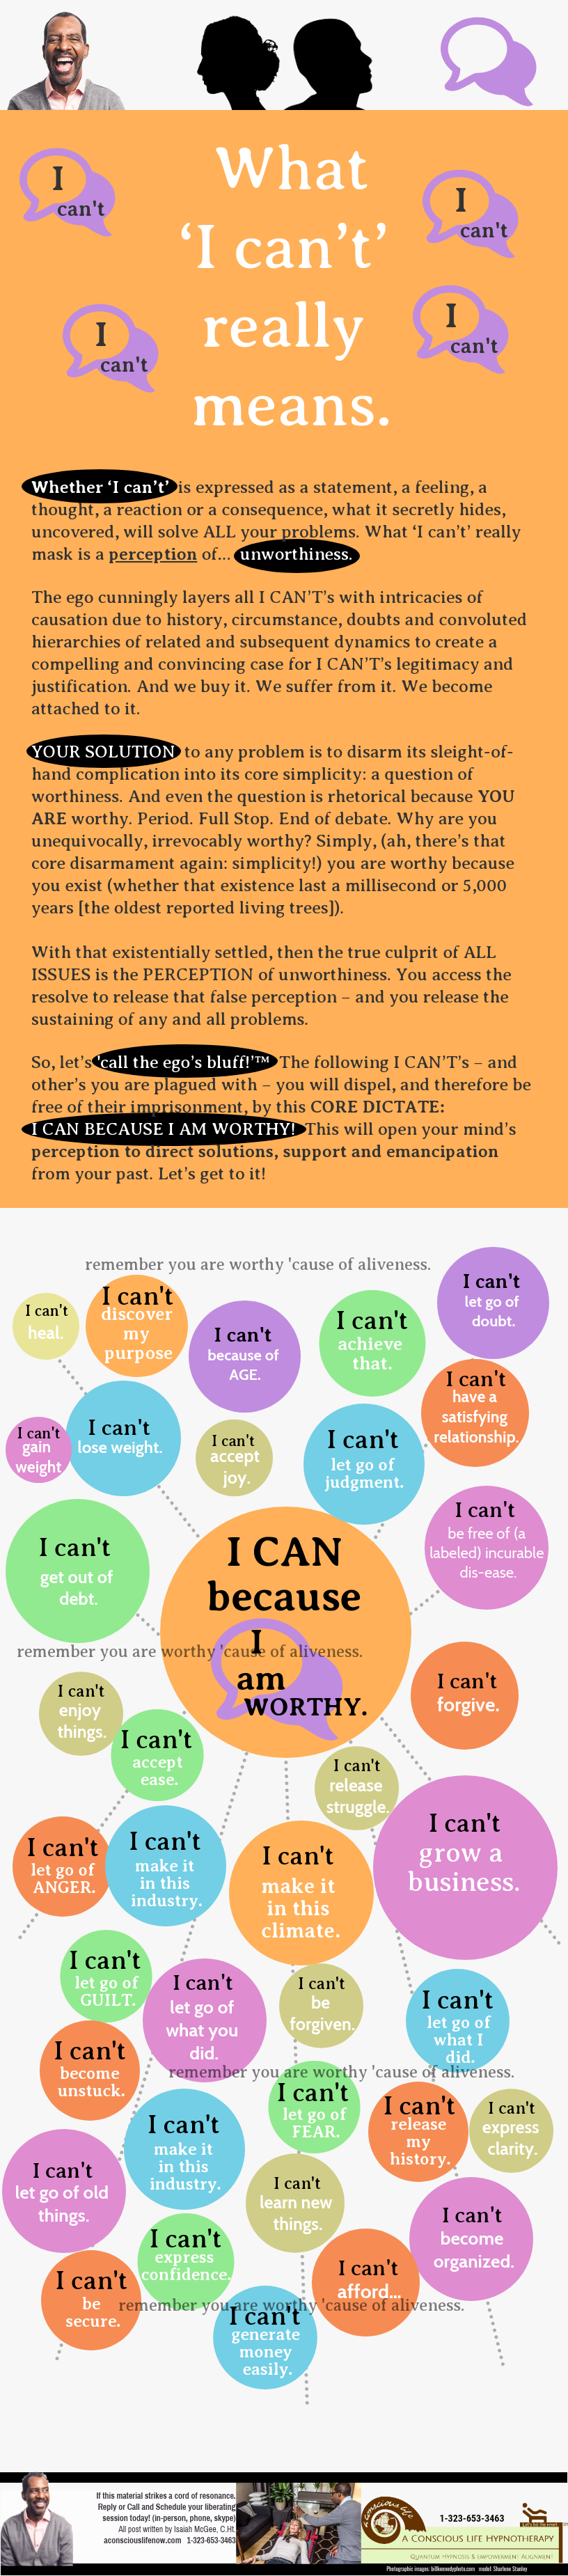 What ‘I can’t’ Means to Fulfillment